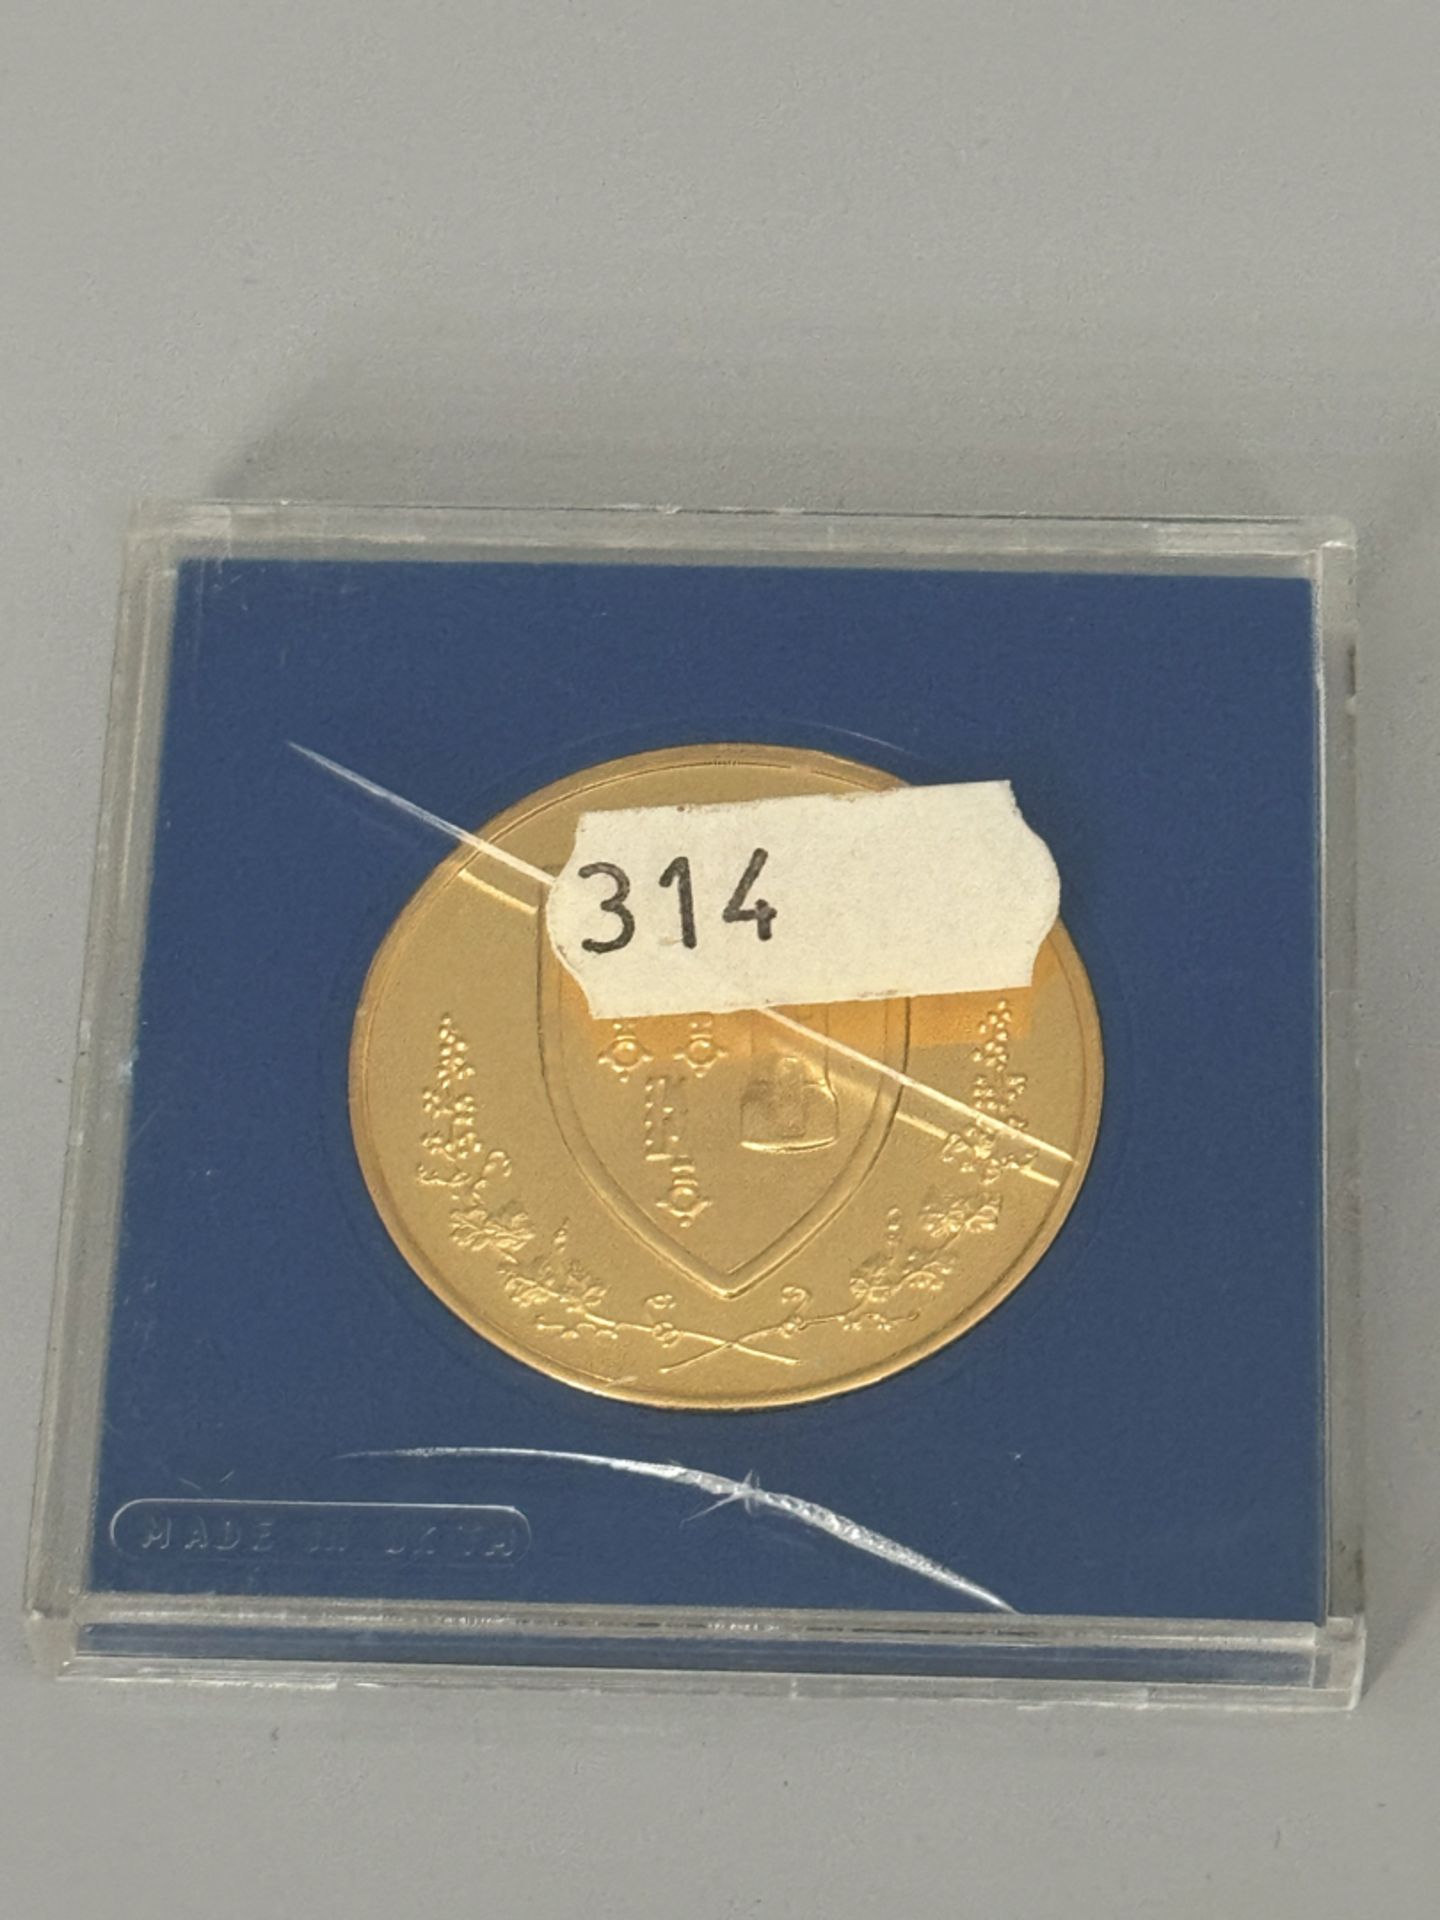 Beaune Hospices 22ct Gold Plated Coin / Medal - Image 2 of 4